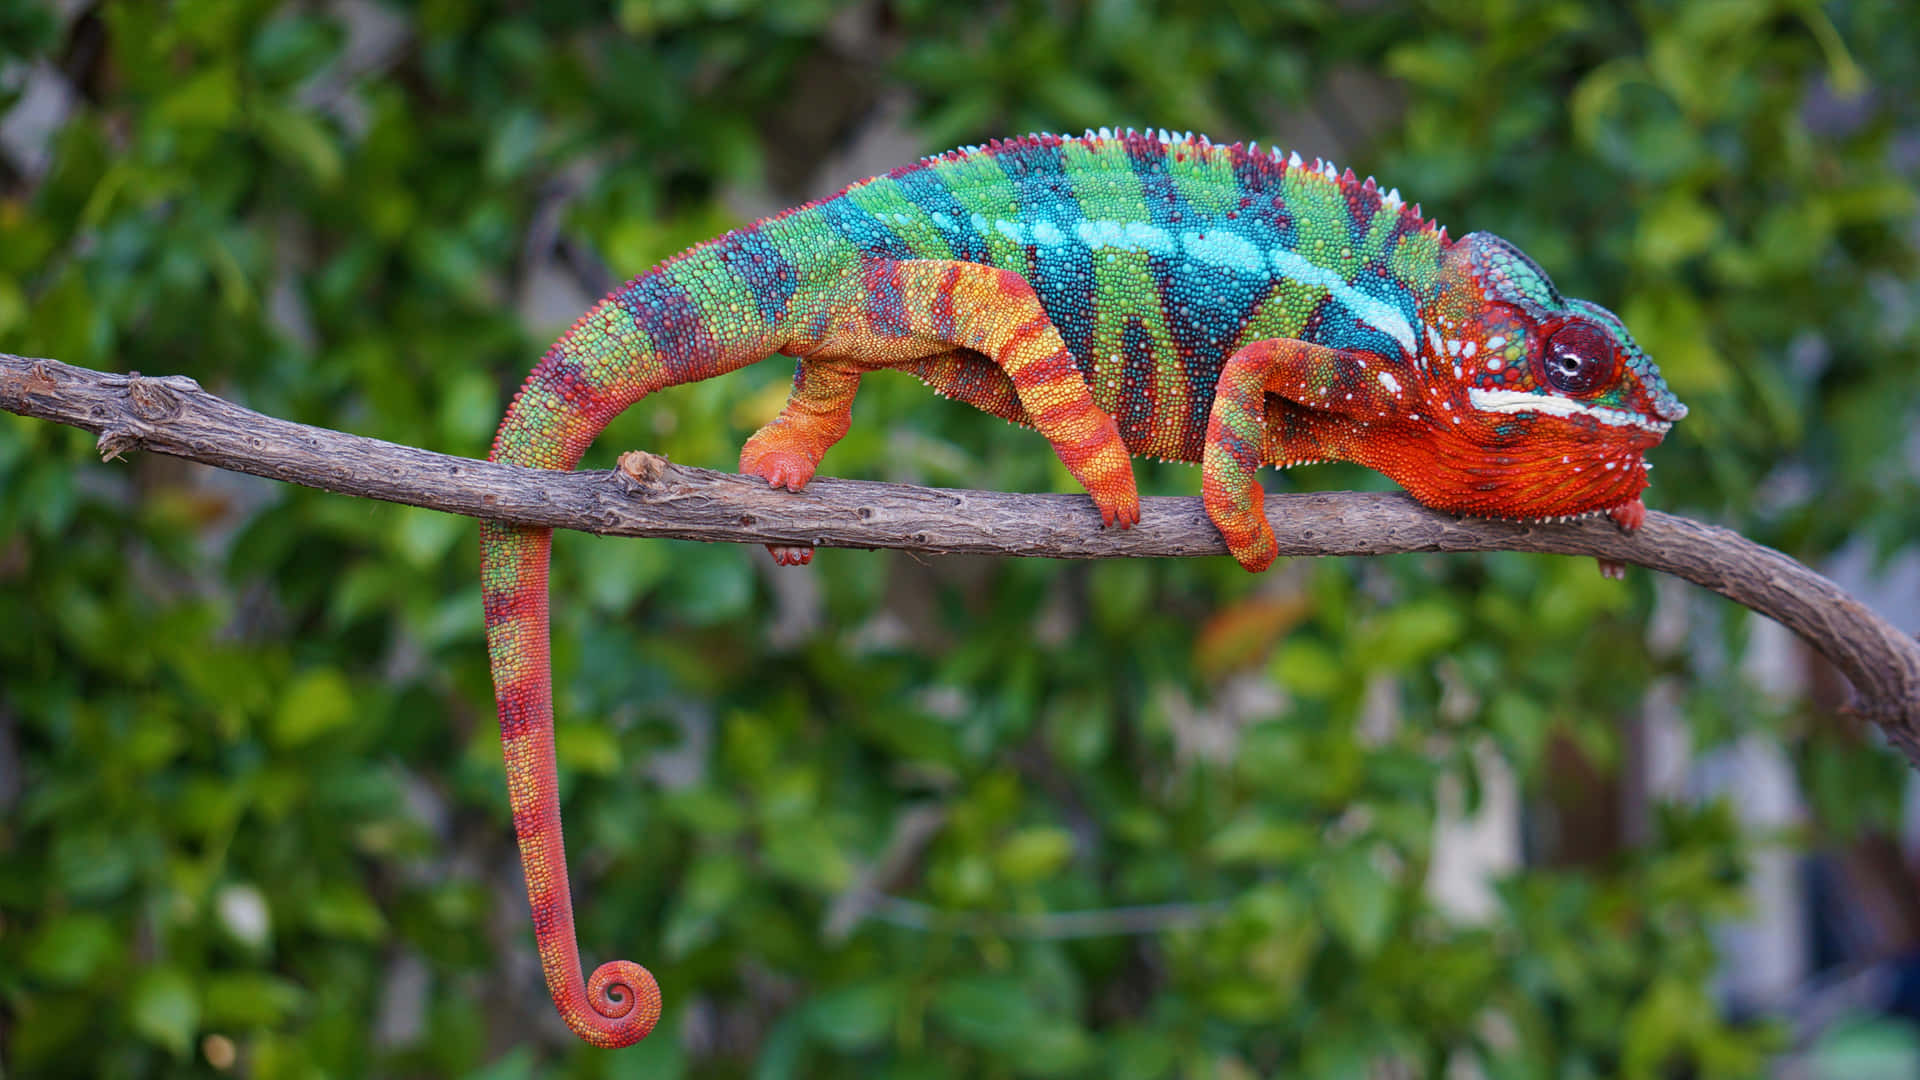 A Colorful Chameleon